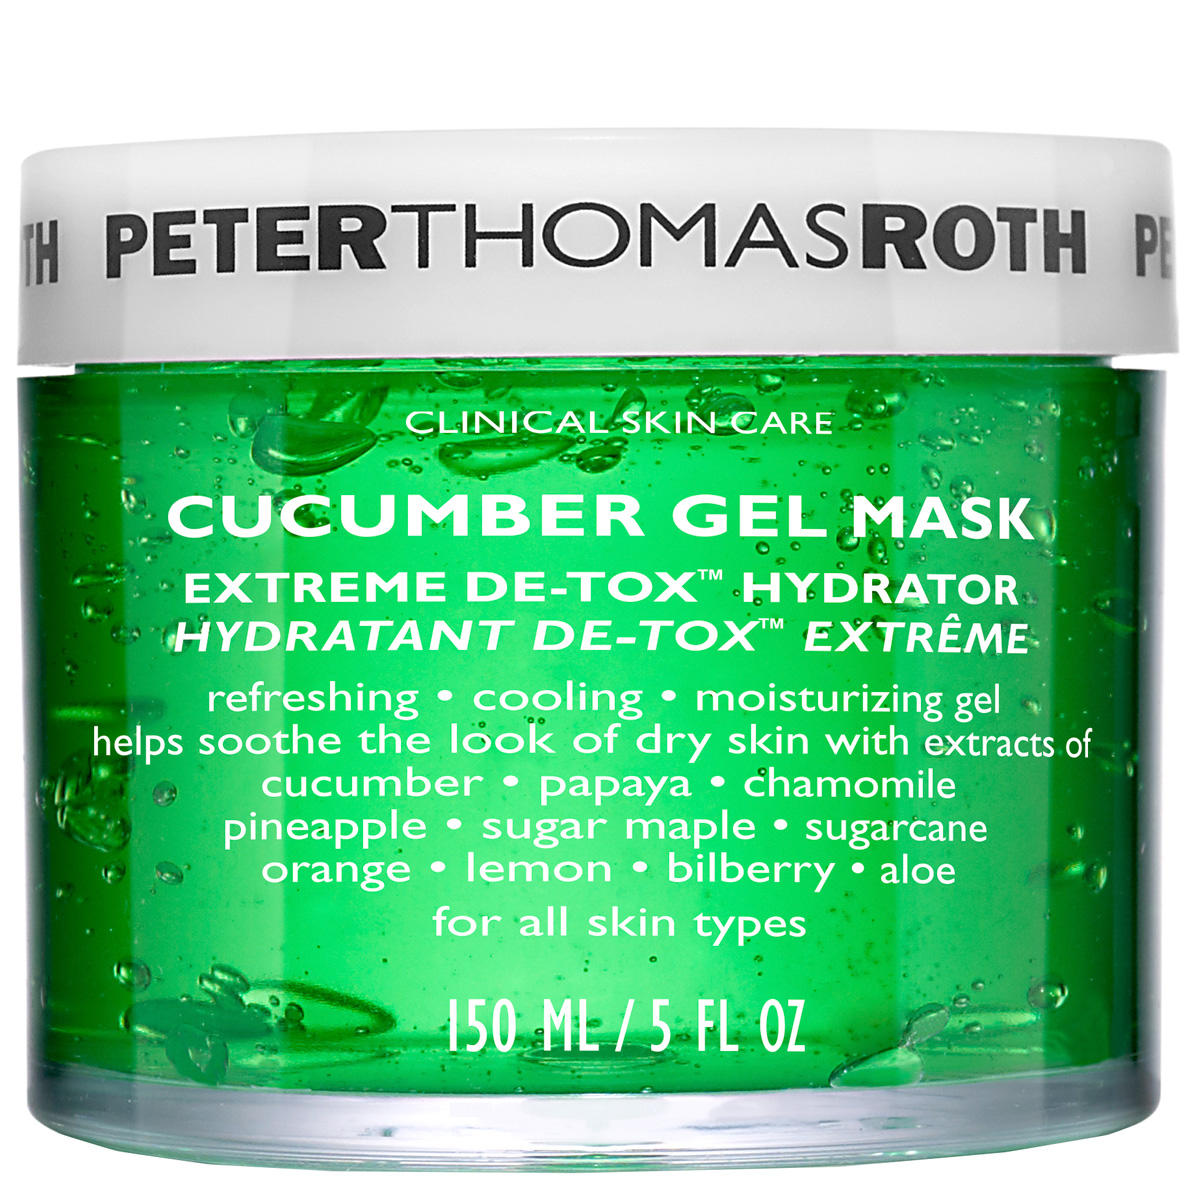 PETER THOMAS ROTH CLINICAL SKIN CARE Cucumber Gel Mask 150 ml - 2